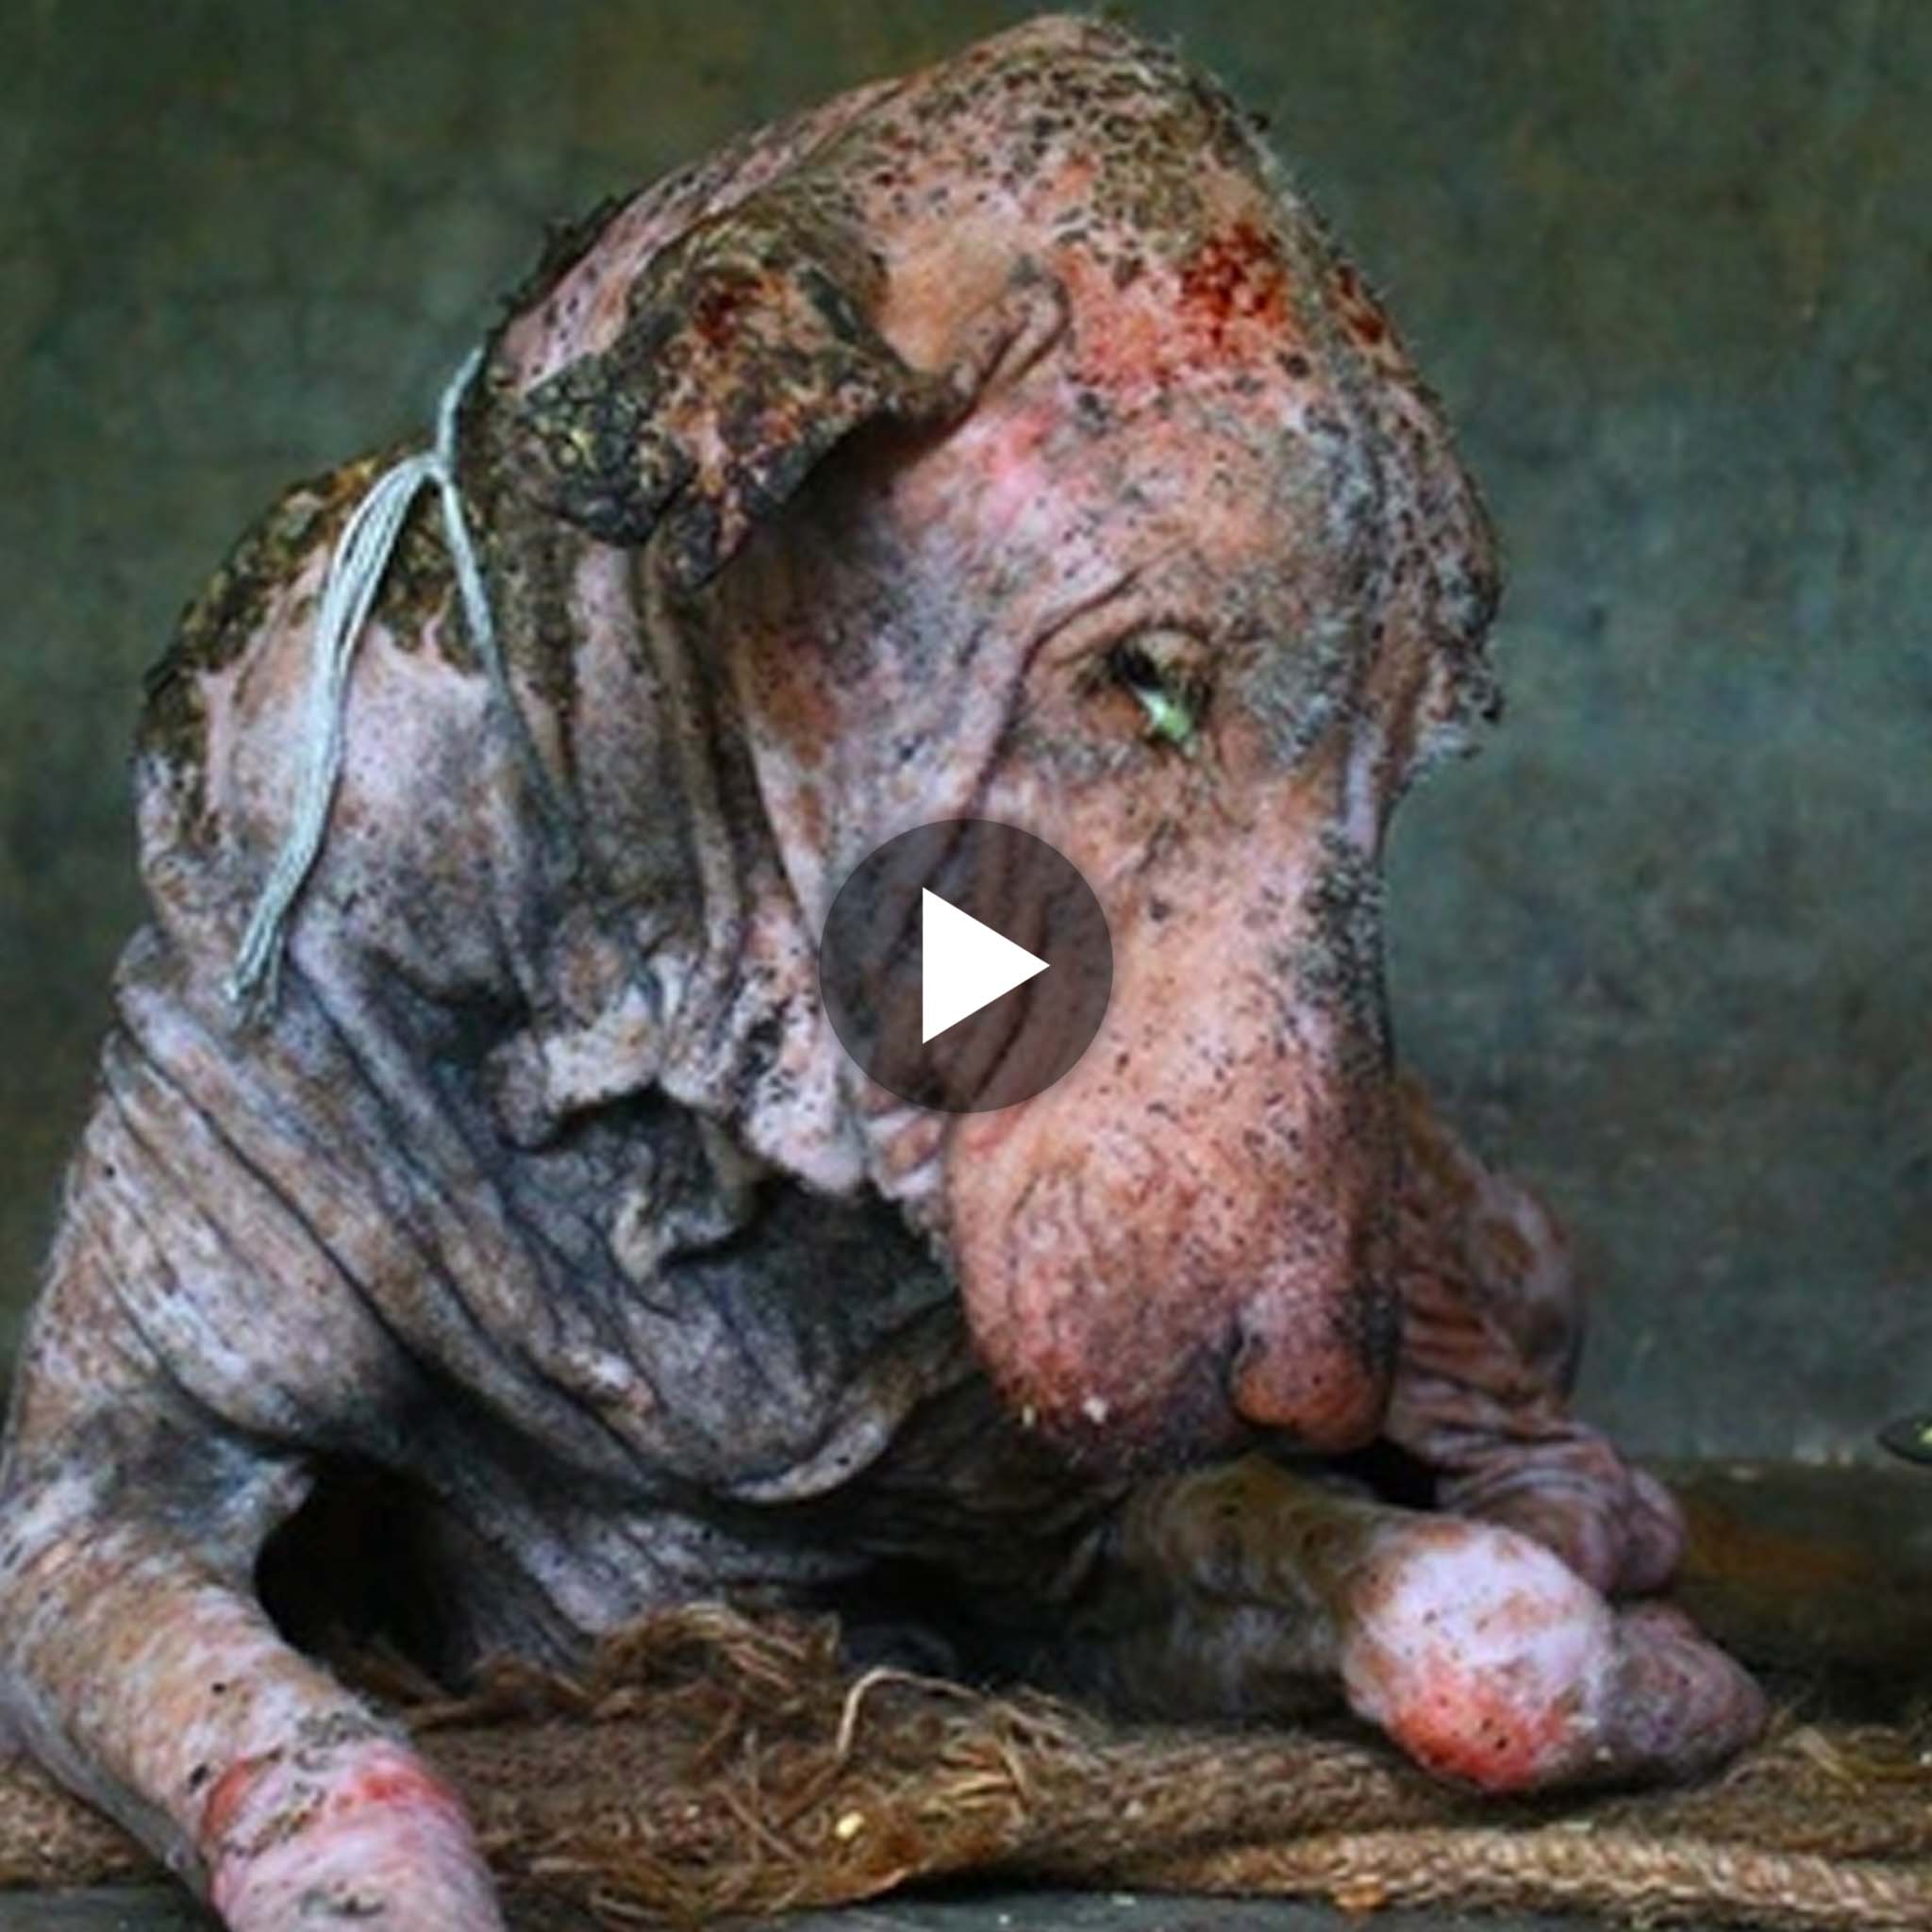 Incredible! A dog near death regains life and makes an amazing comeback in India (VIDEO).